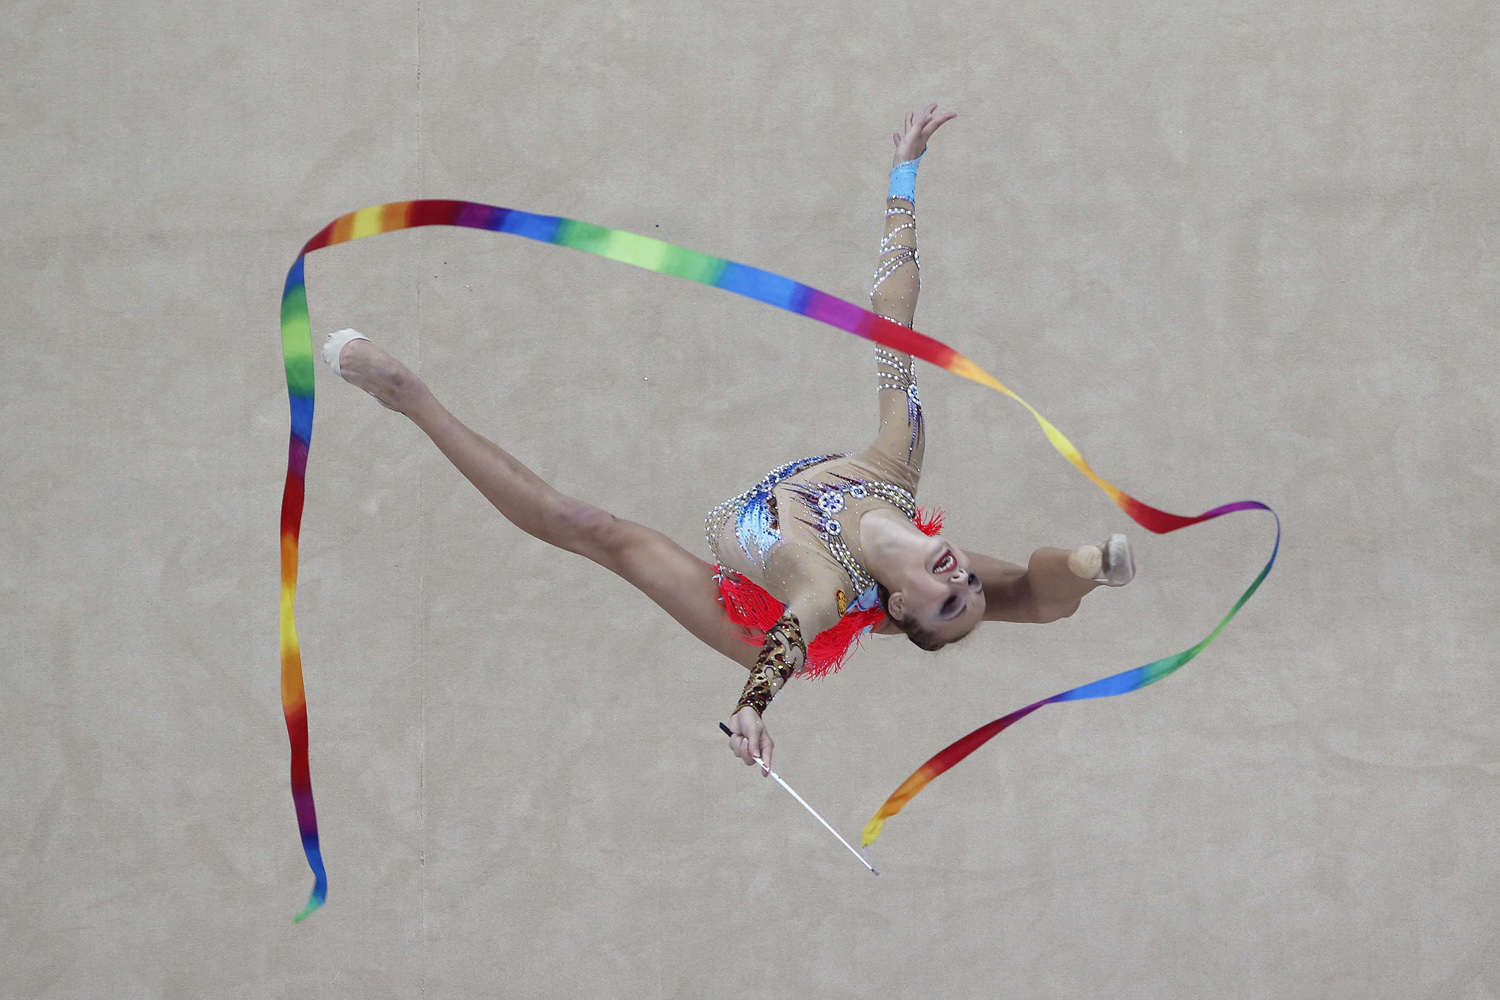 Russian's Irina Annenkova competes during the rhythmic gymnastics individual all-around final match at the 2014 Nanjing Youth Olympic Games in Nanjing, China on Aug. 27, 2014.